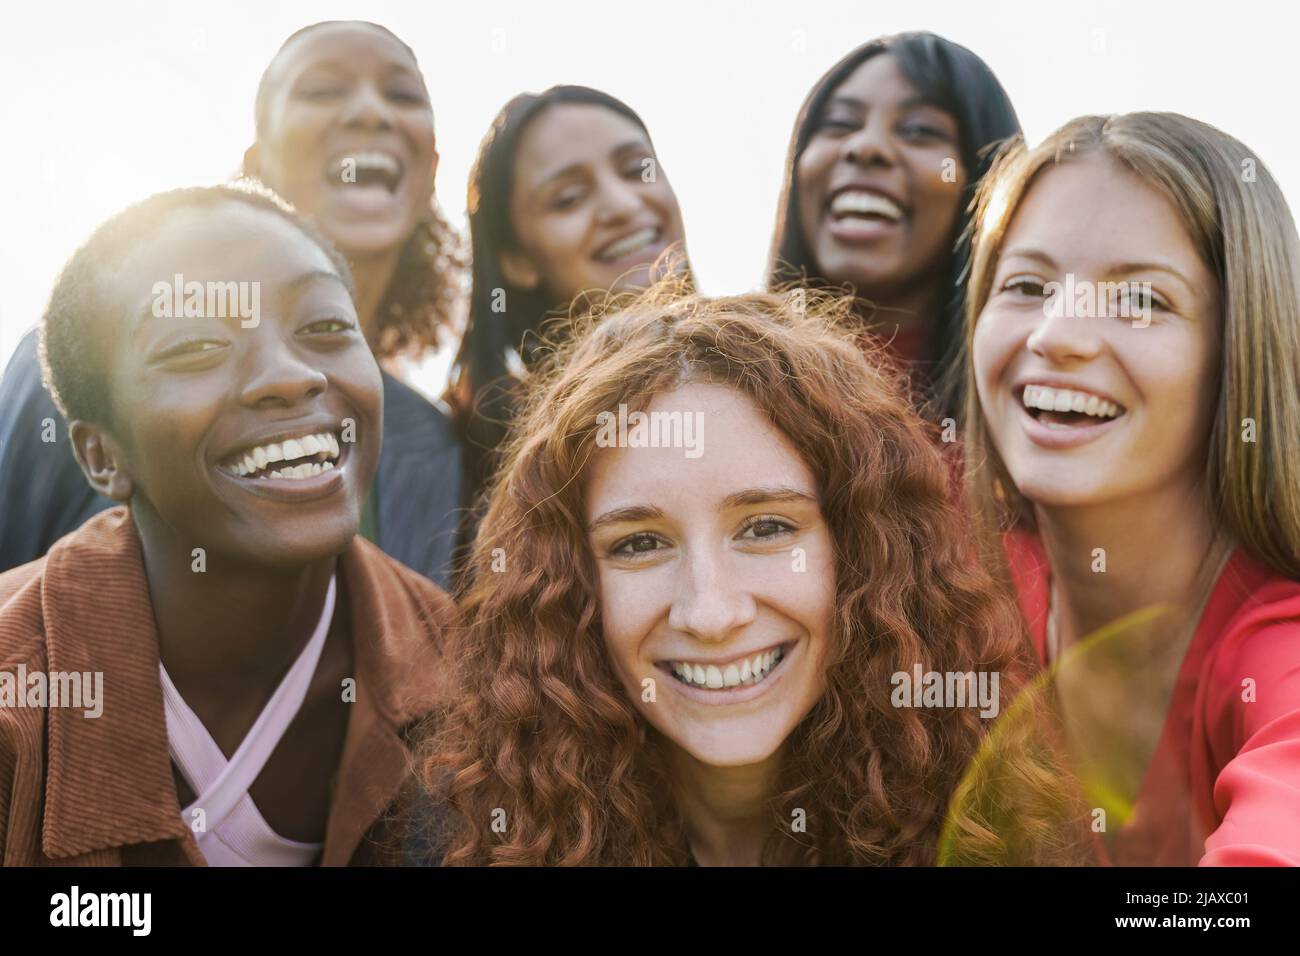 Multiethnic young women having fun together doing selfie outdoor - Focus on ginger hair girl face - Diversity lifestyle concept Stock Photo